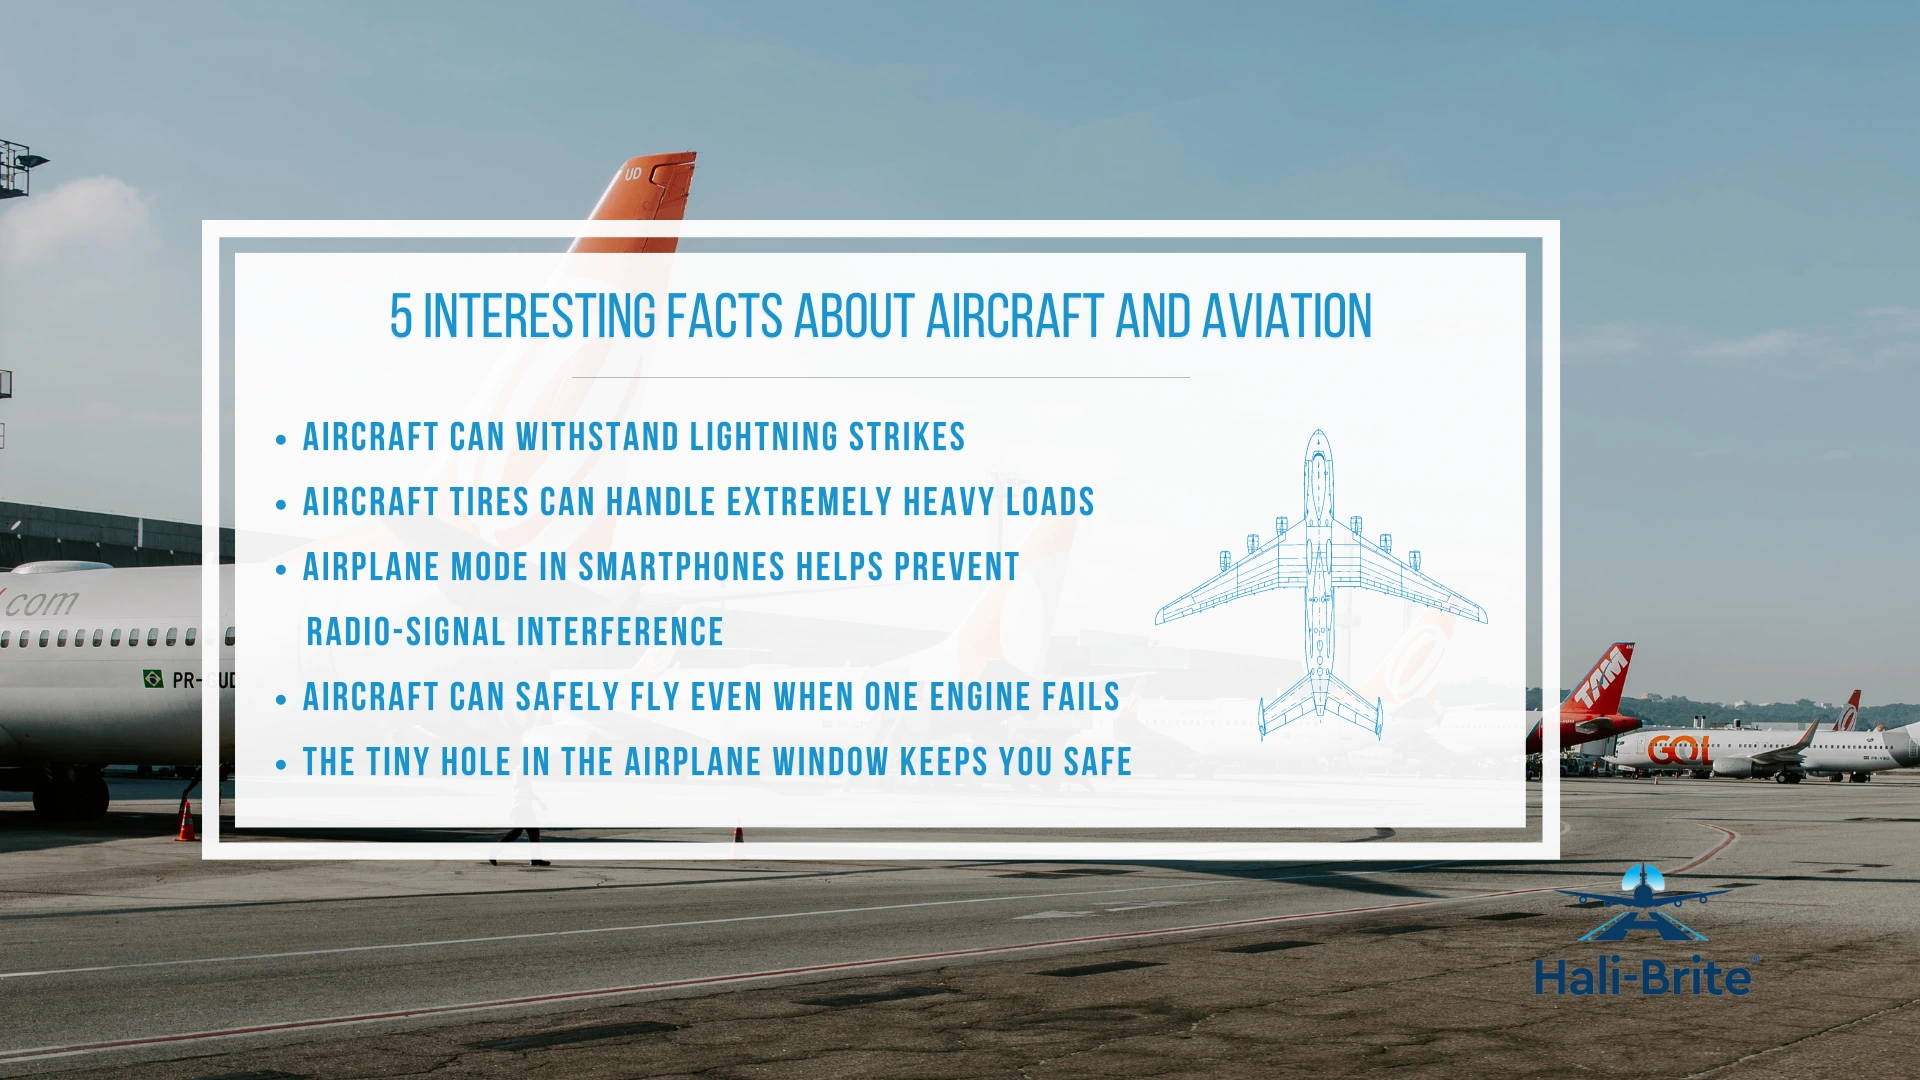 Infographic image of 5 interesting facts about aircraft and aviation